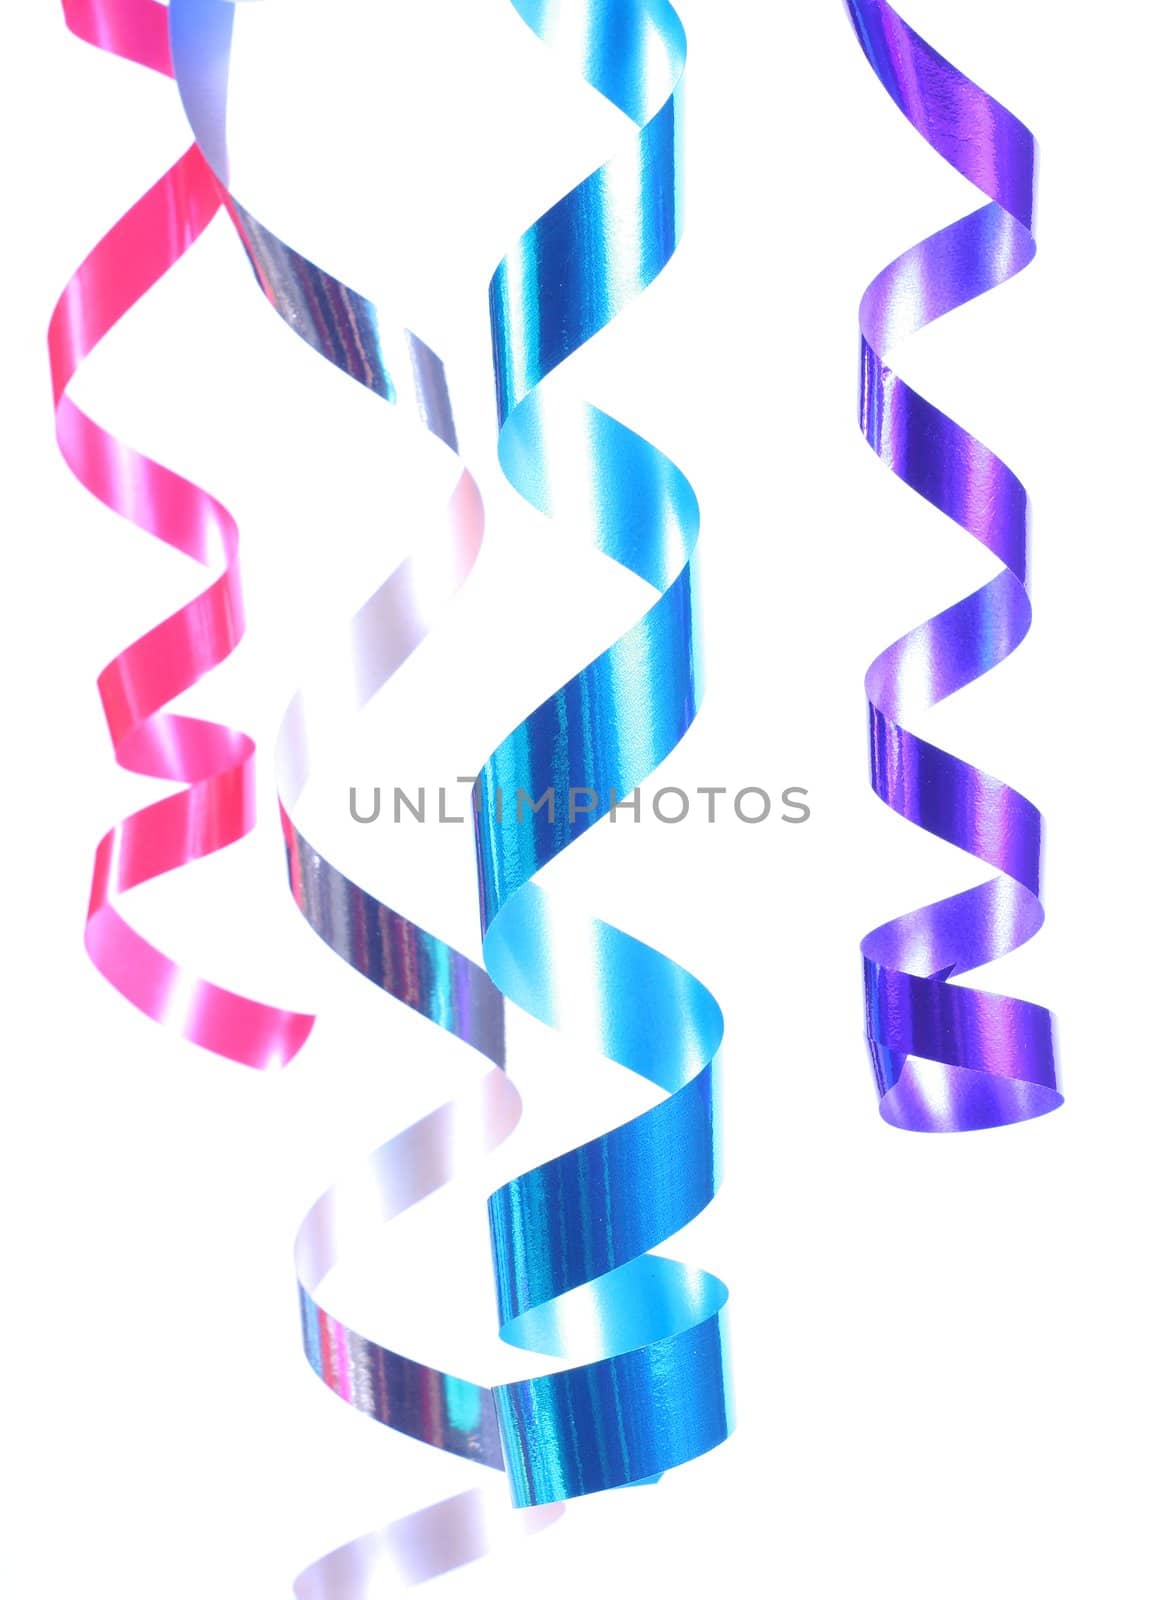 Shiny colorful satin ribbons hanging in curls. Holiday, celebration, party theme.